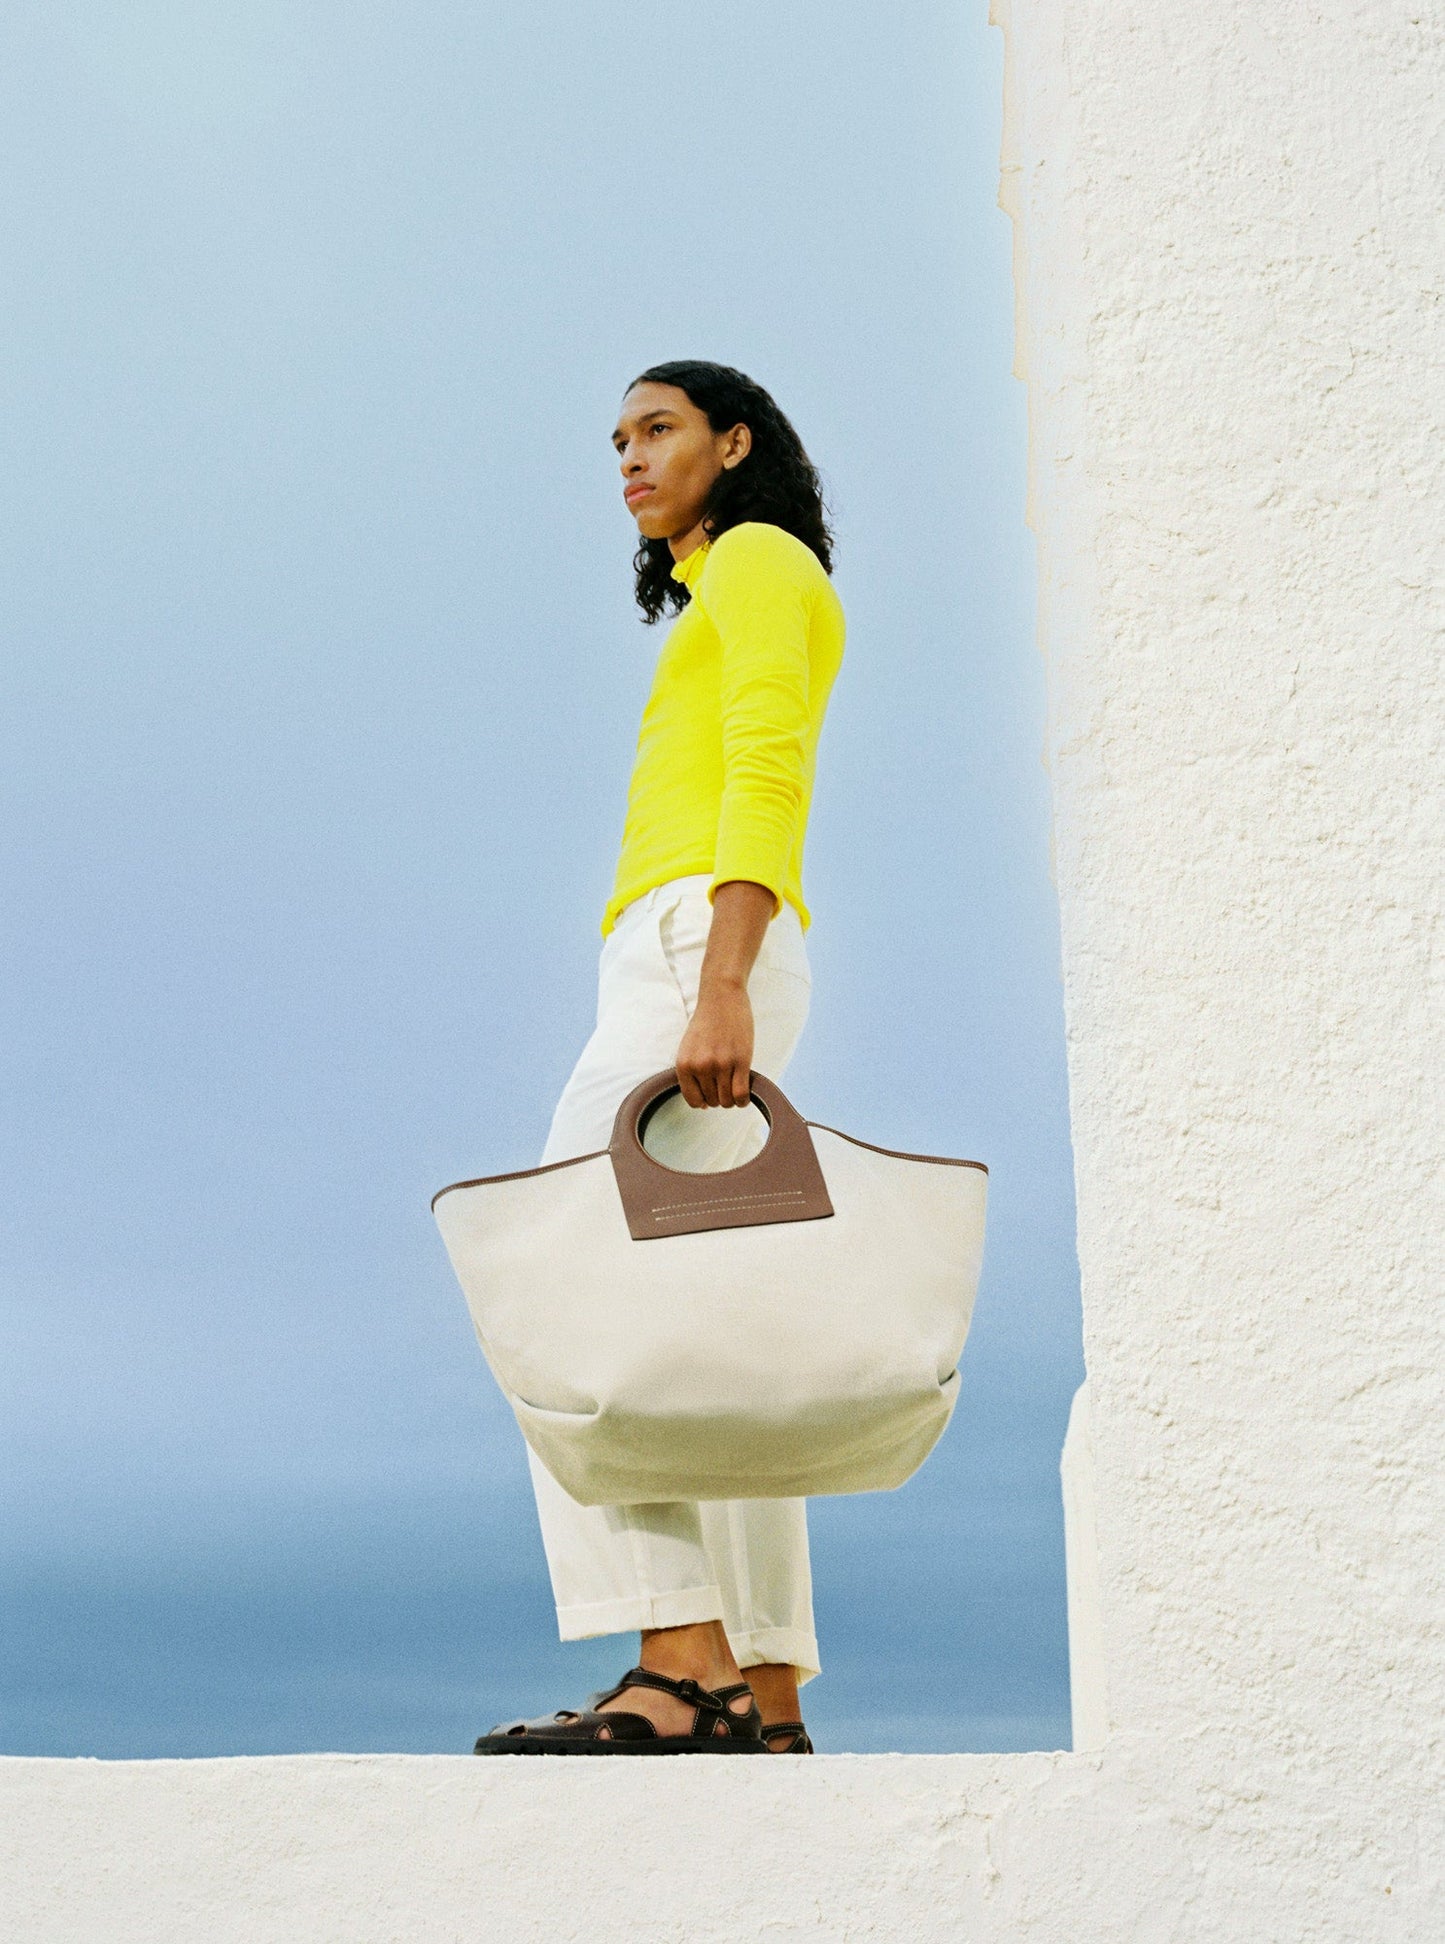 HEREU- Cala Small Leather-trimmed Canvas Tote Bag- Woman- Uni - Beige